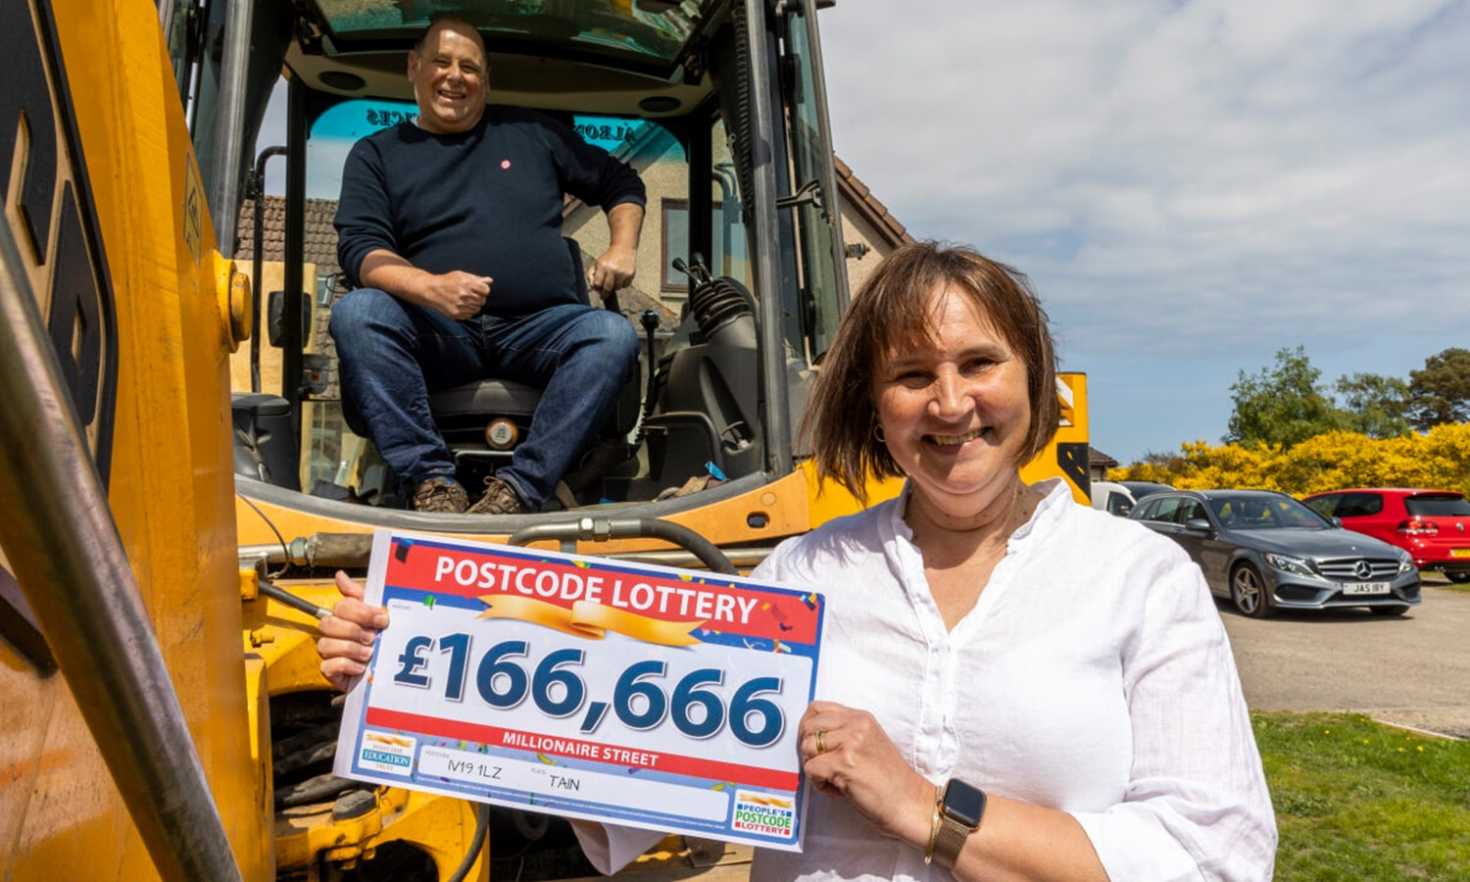 Angela and Gordon couldn't believe their luck when our Postcode Lottery team turned up at their front door